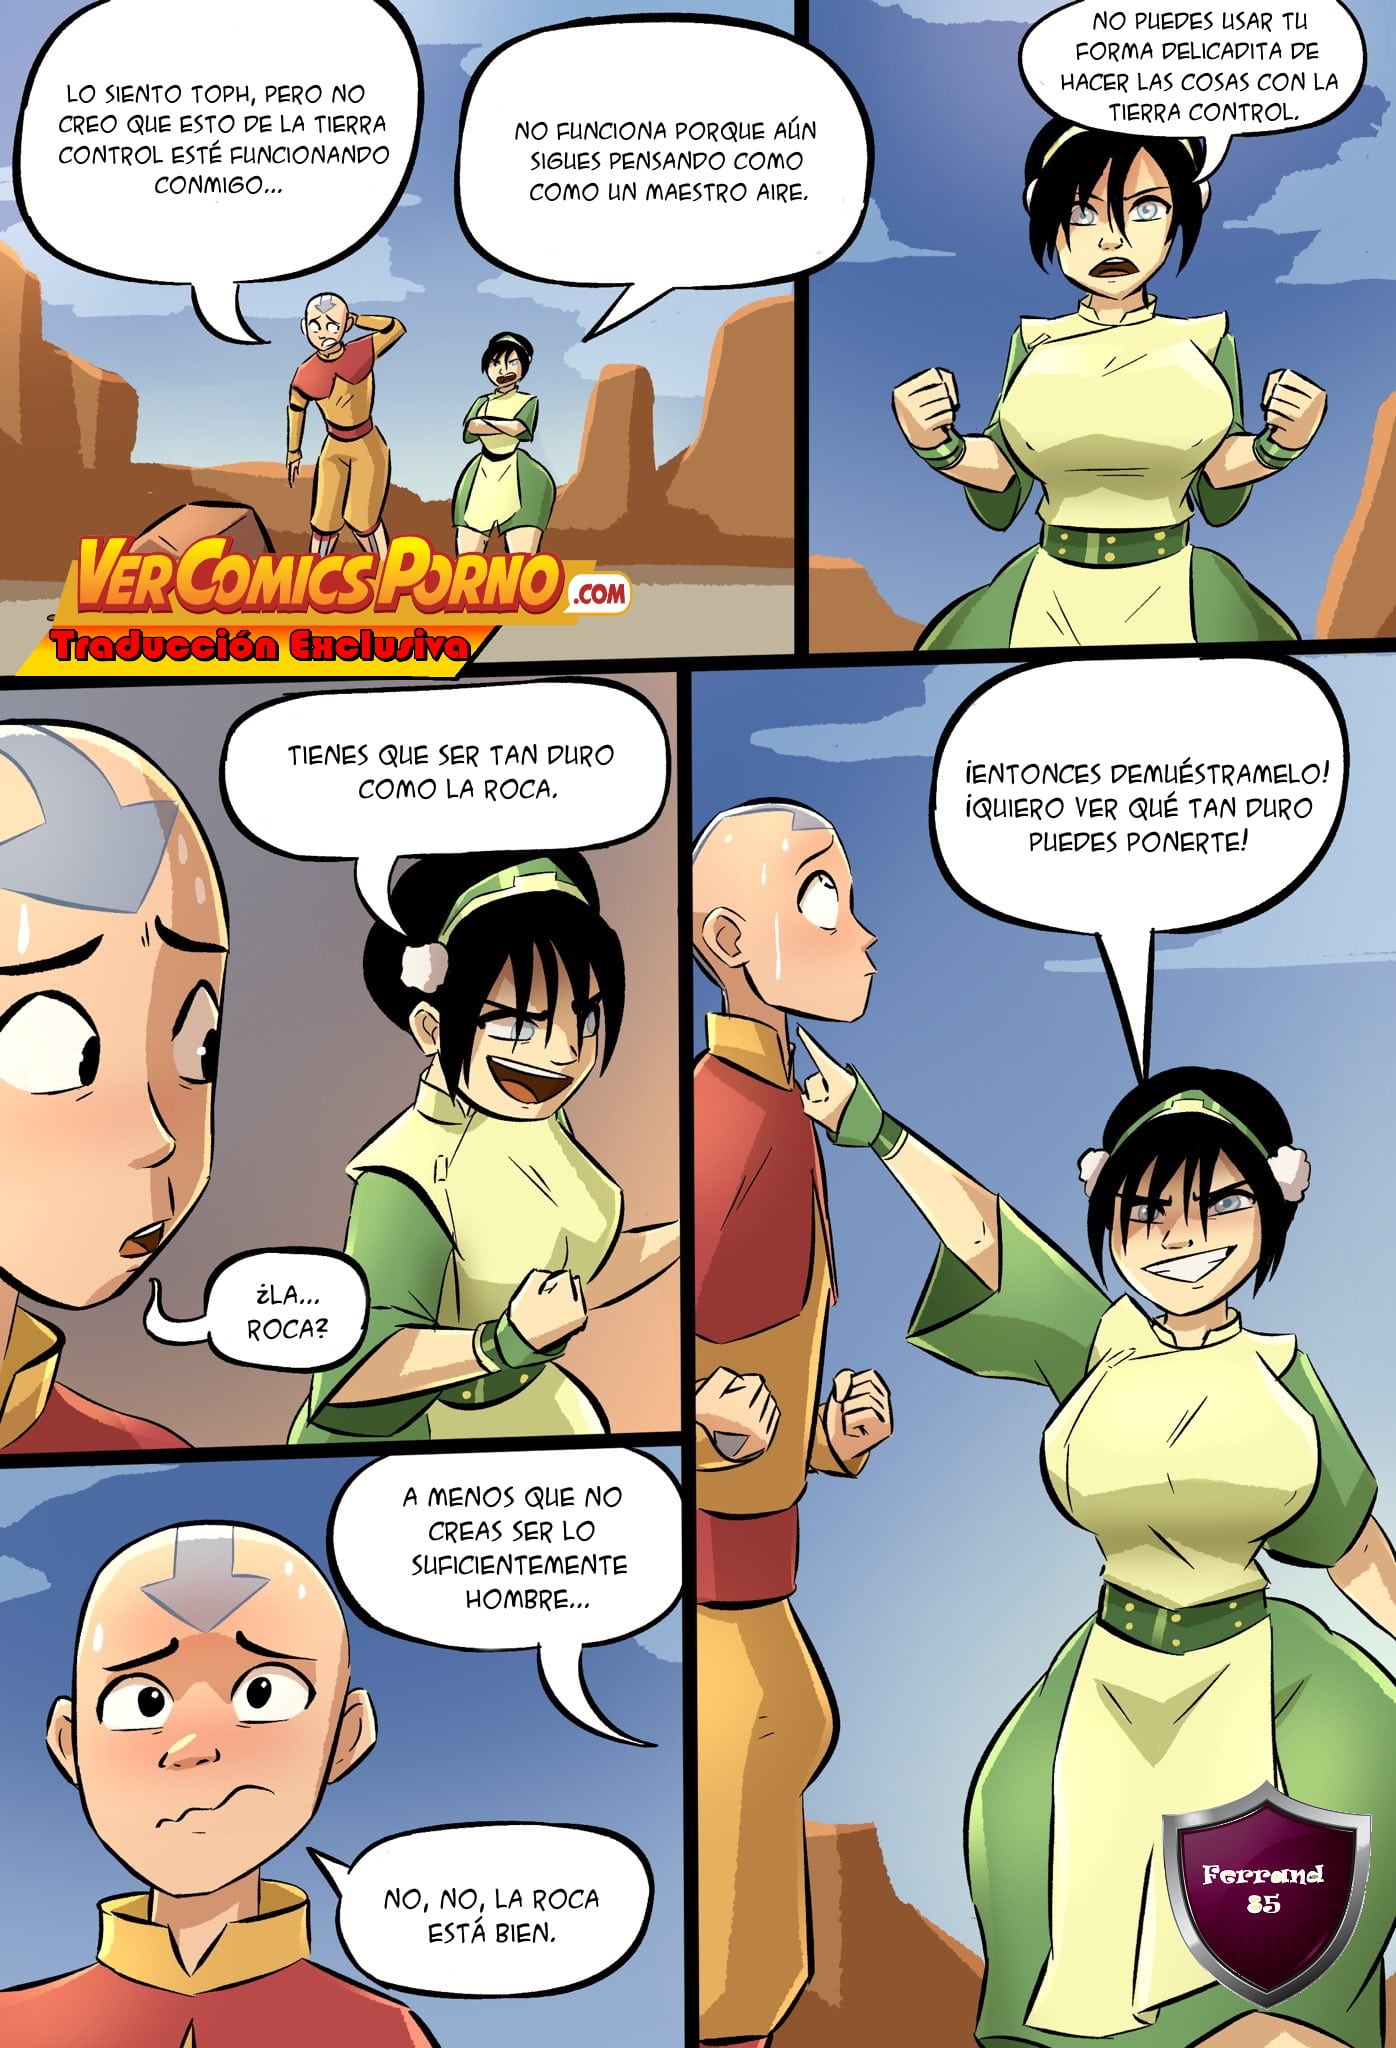 [emmabrave3] Thic Toph - 0